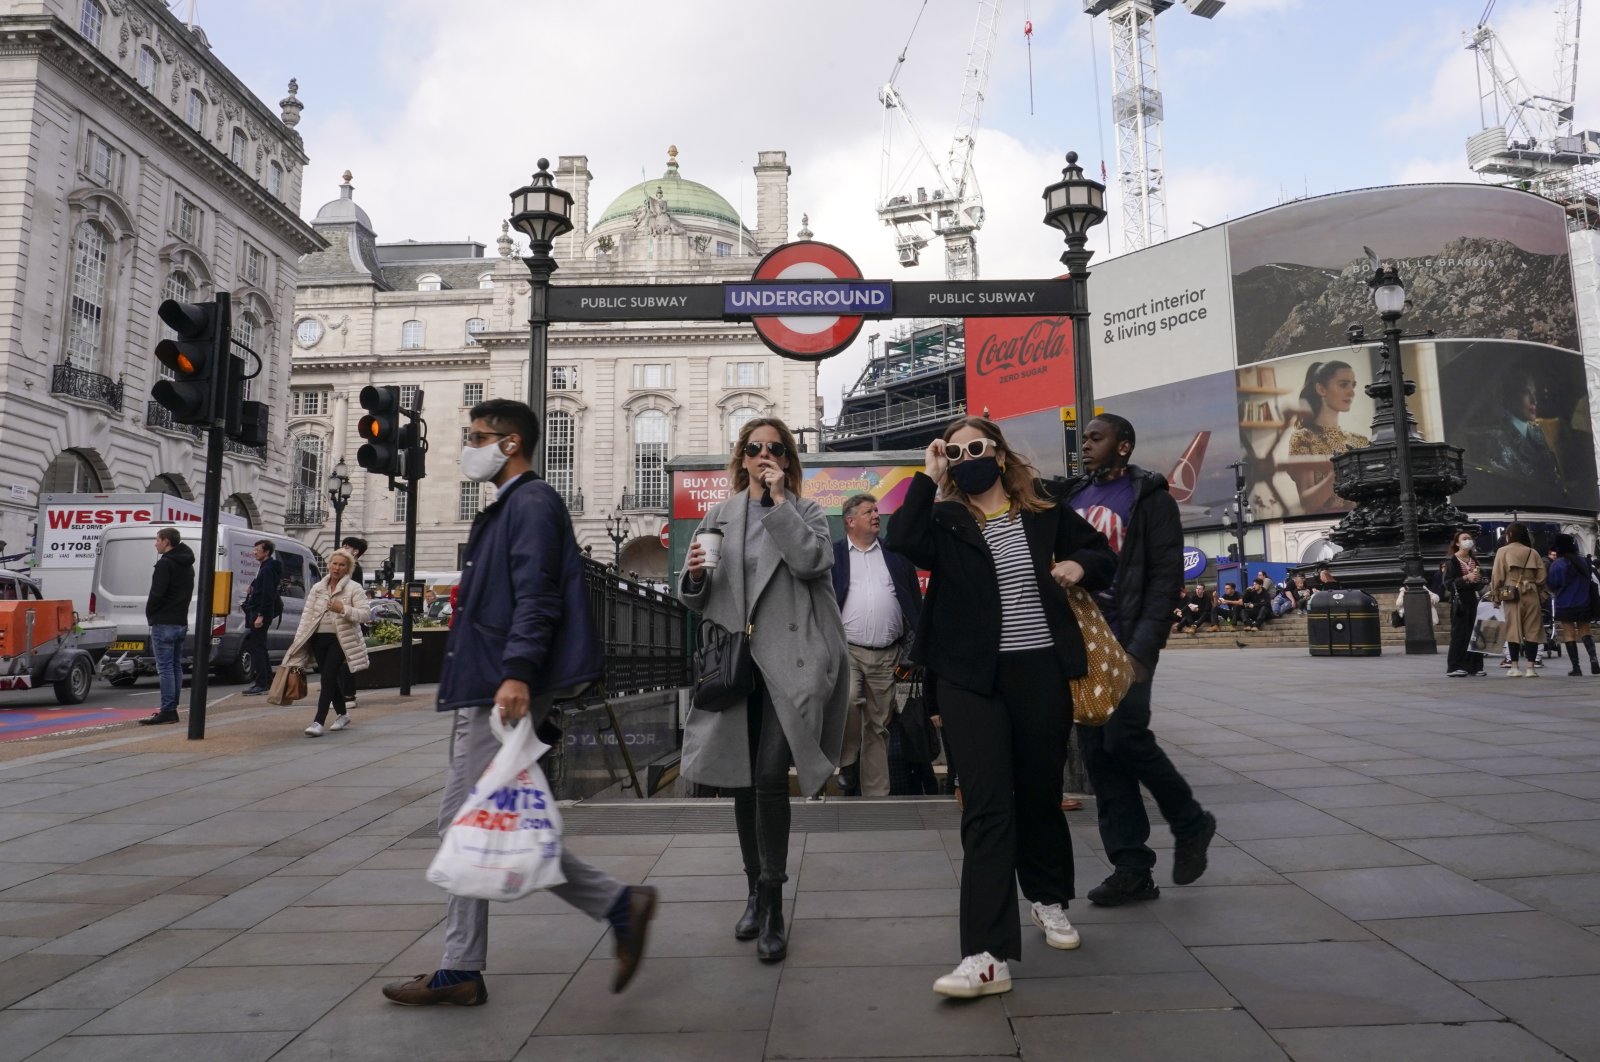 People wear face masks as they exit Piccadilly Circus underground station, in London, U.K., Oct. 19, 2021. (AP Photo)